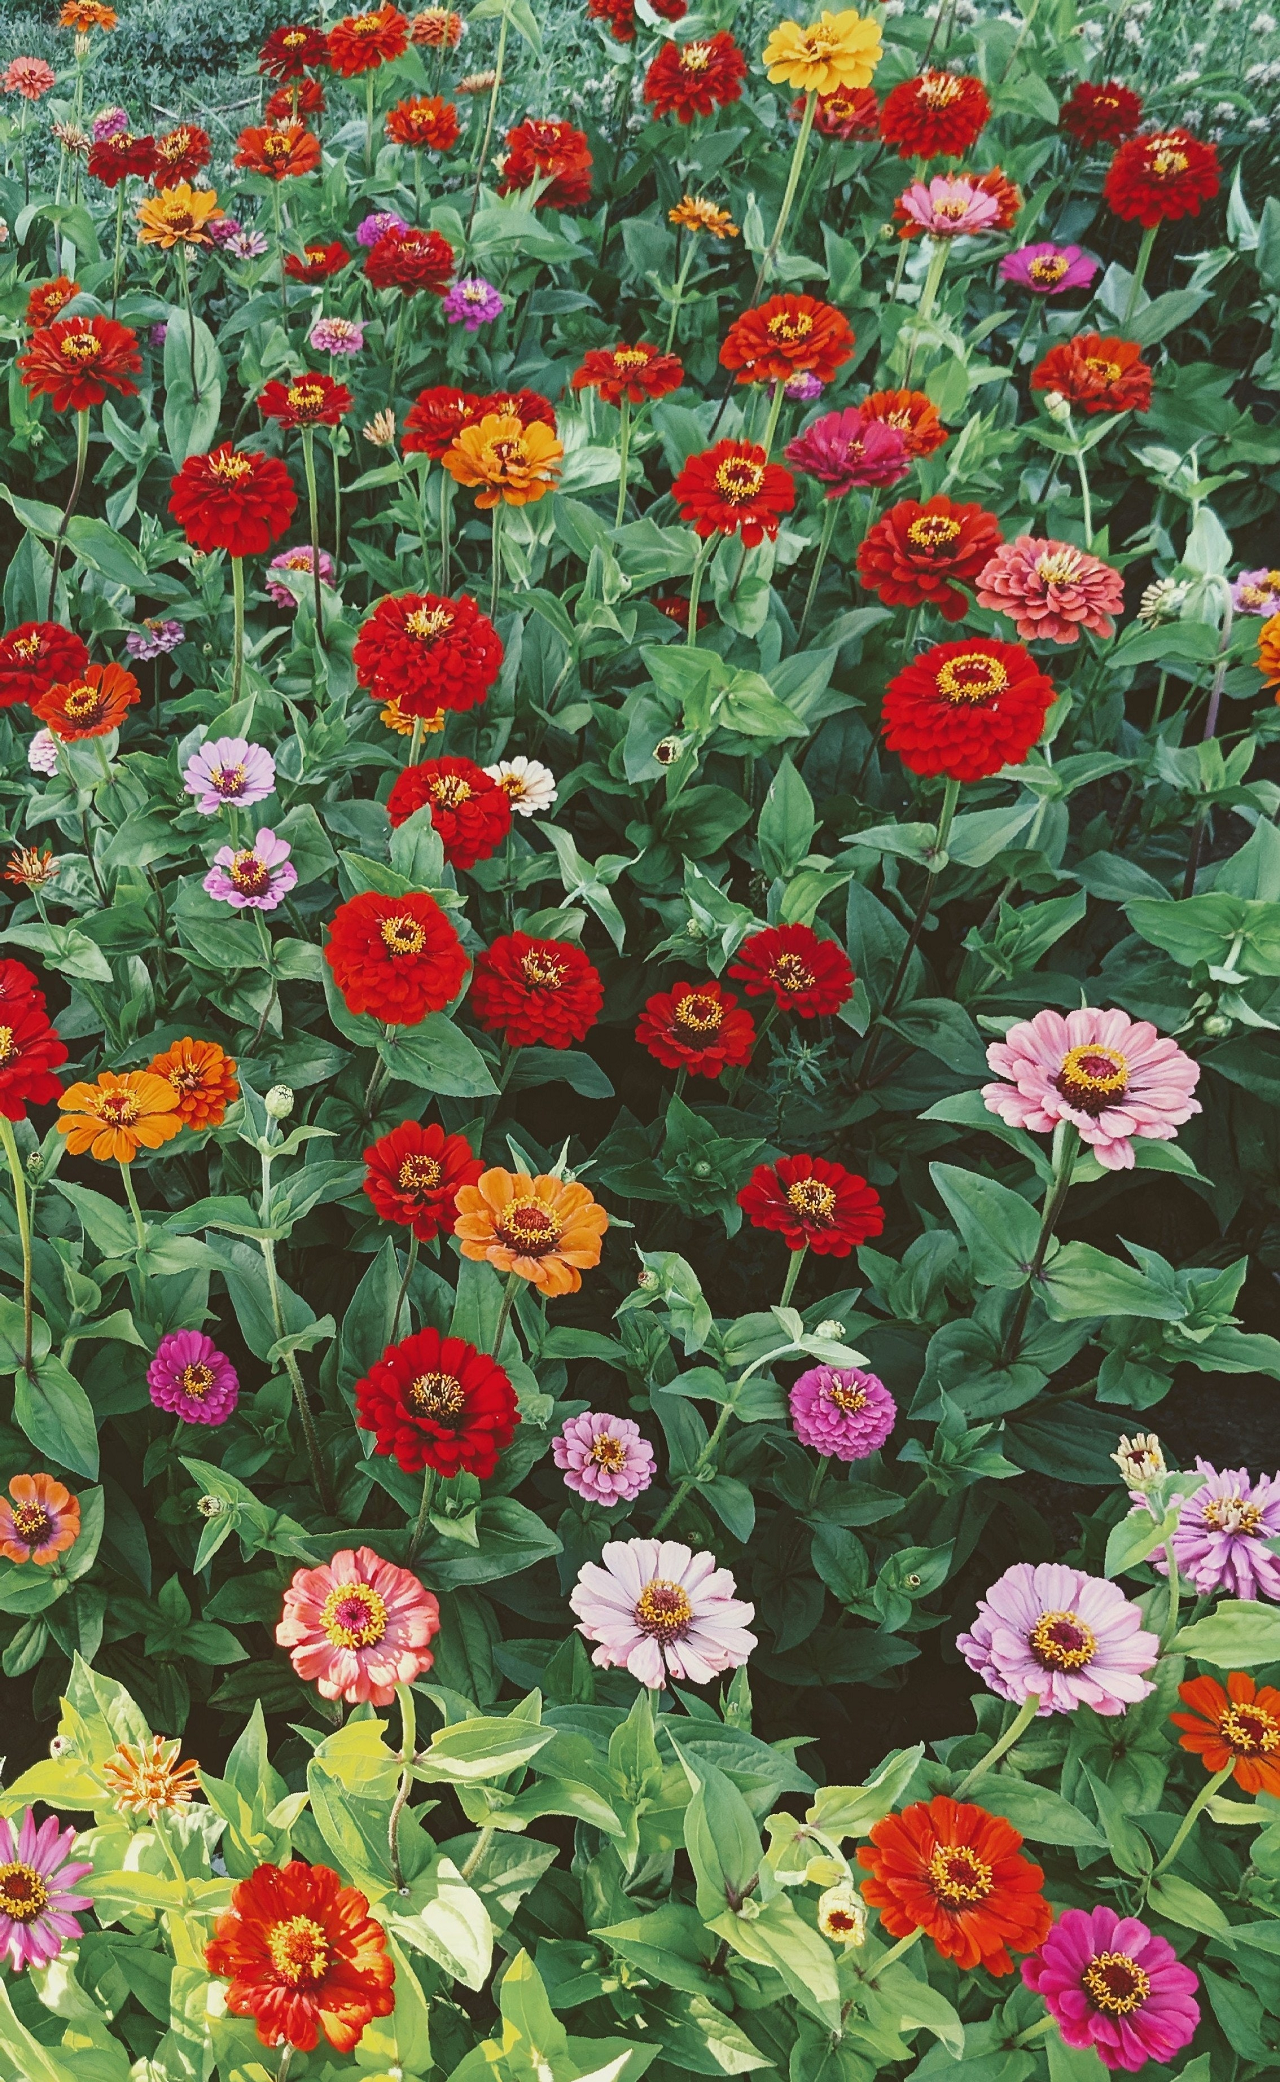 Image of a group of zinnias in bloom.